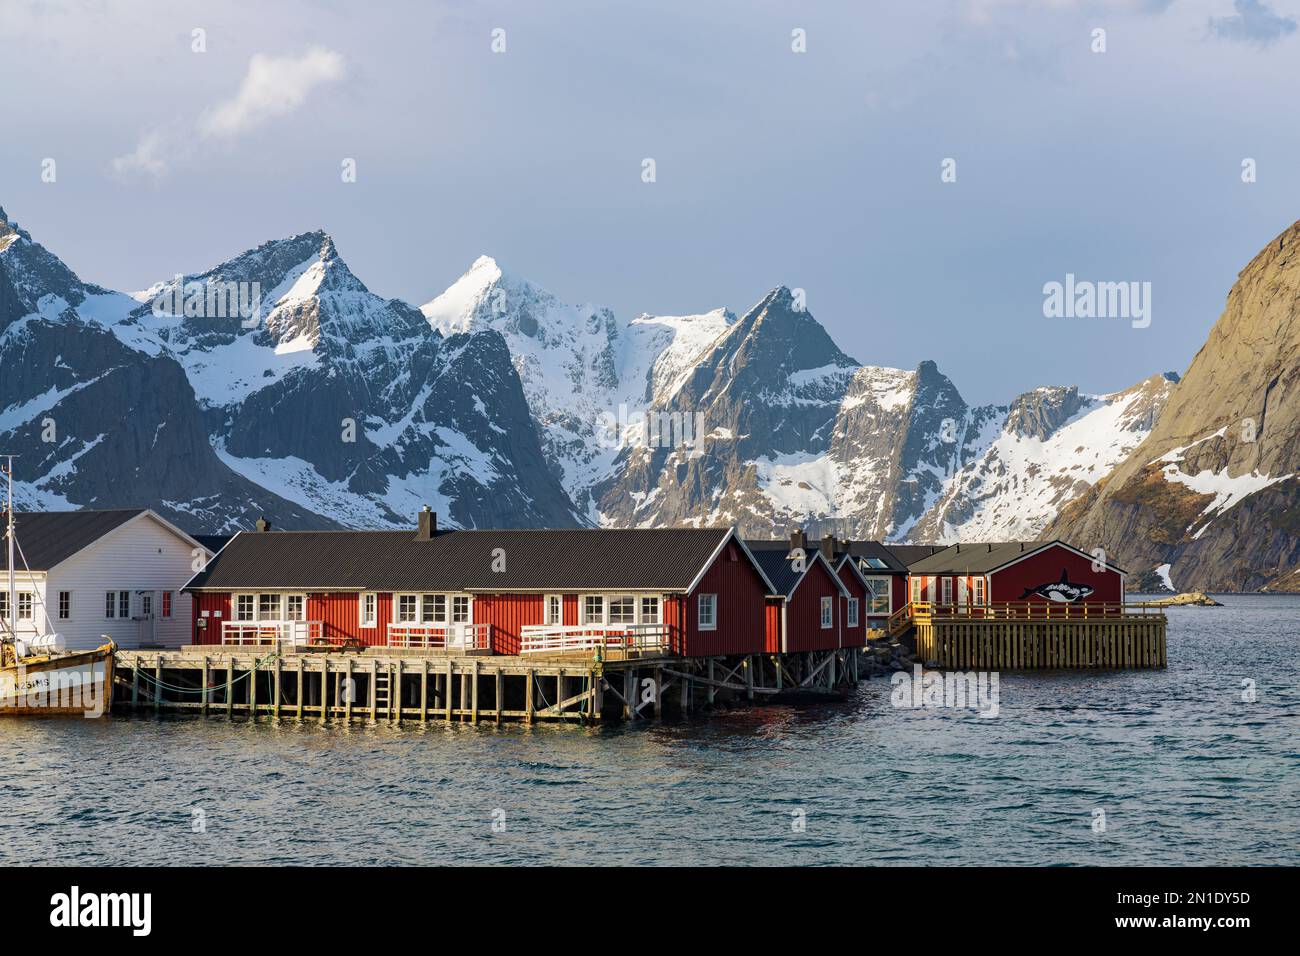 Fishermen's houses with snowcapped mountains in the backdrop, Reine Bay, Lofoten Islands, Nordland county, Norway, Scandinavia, Europe Stock Photo